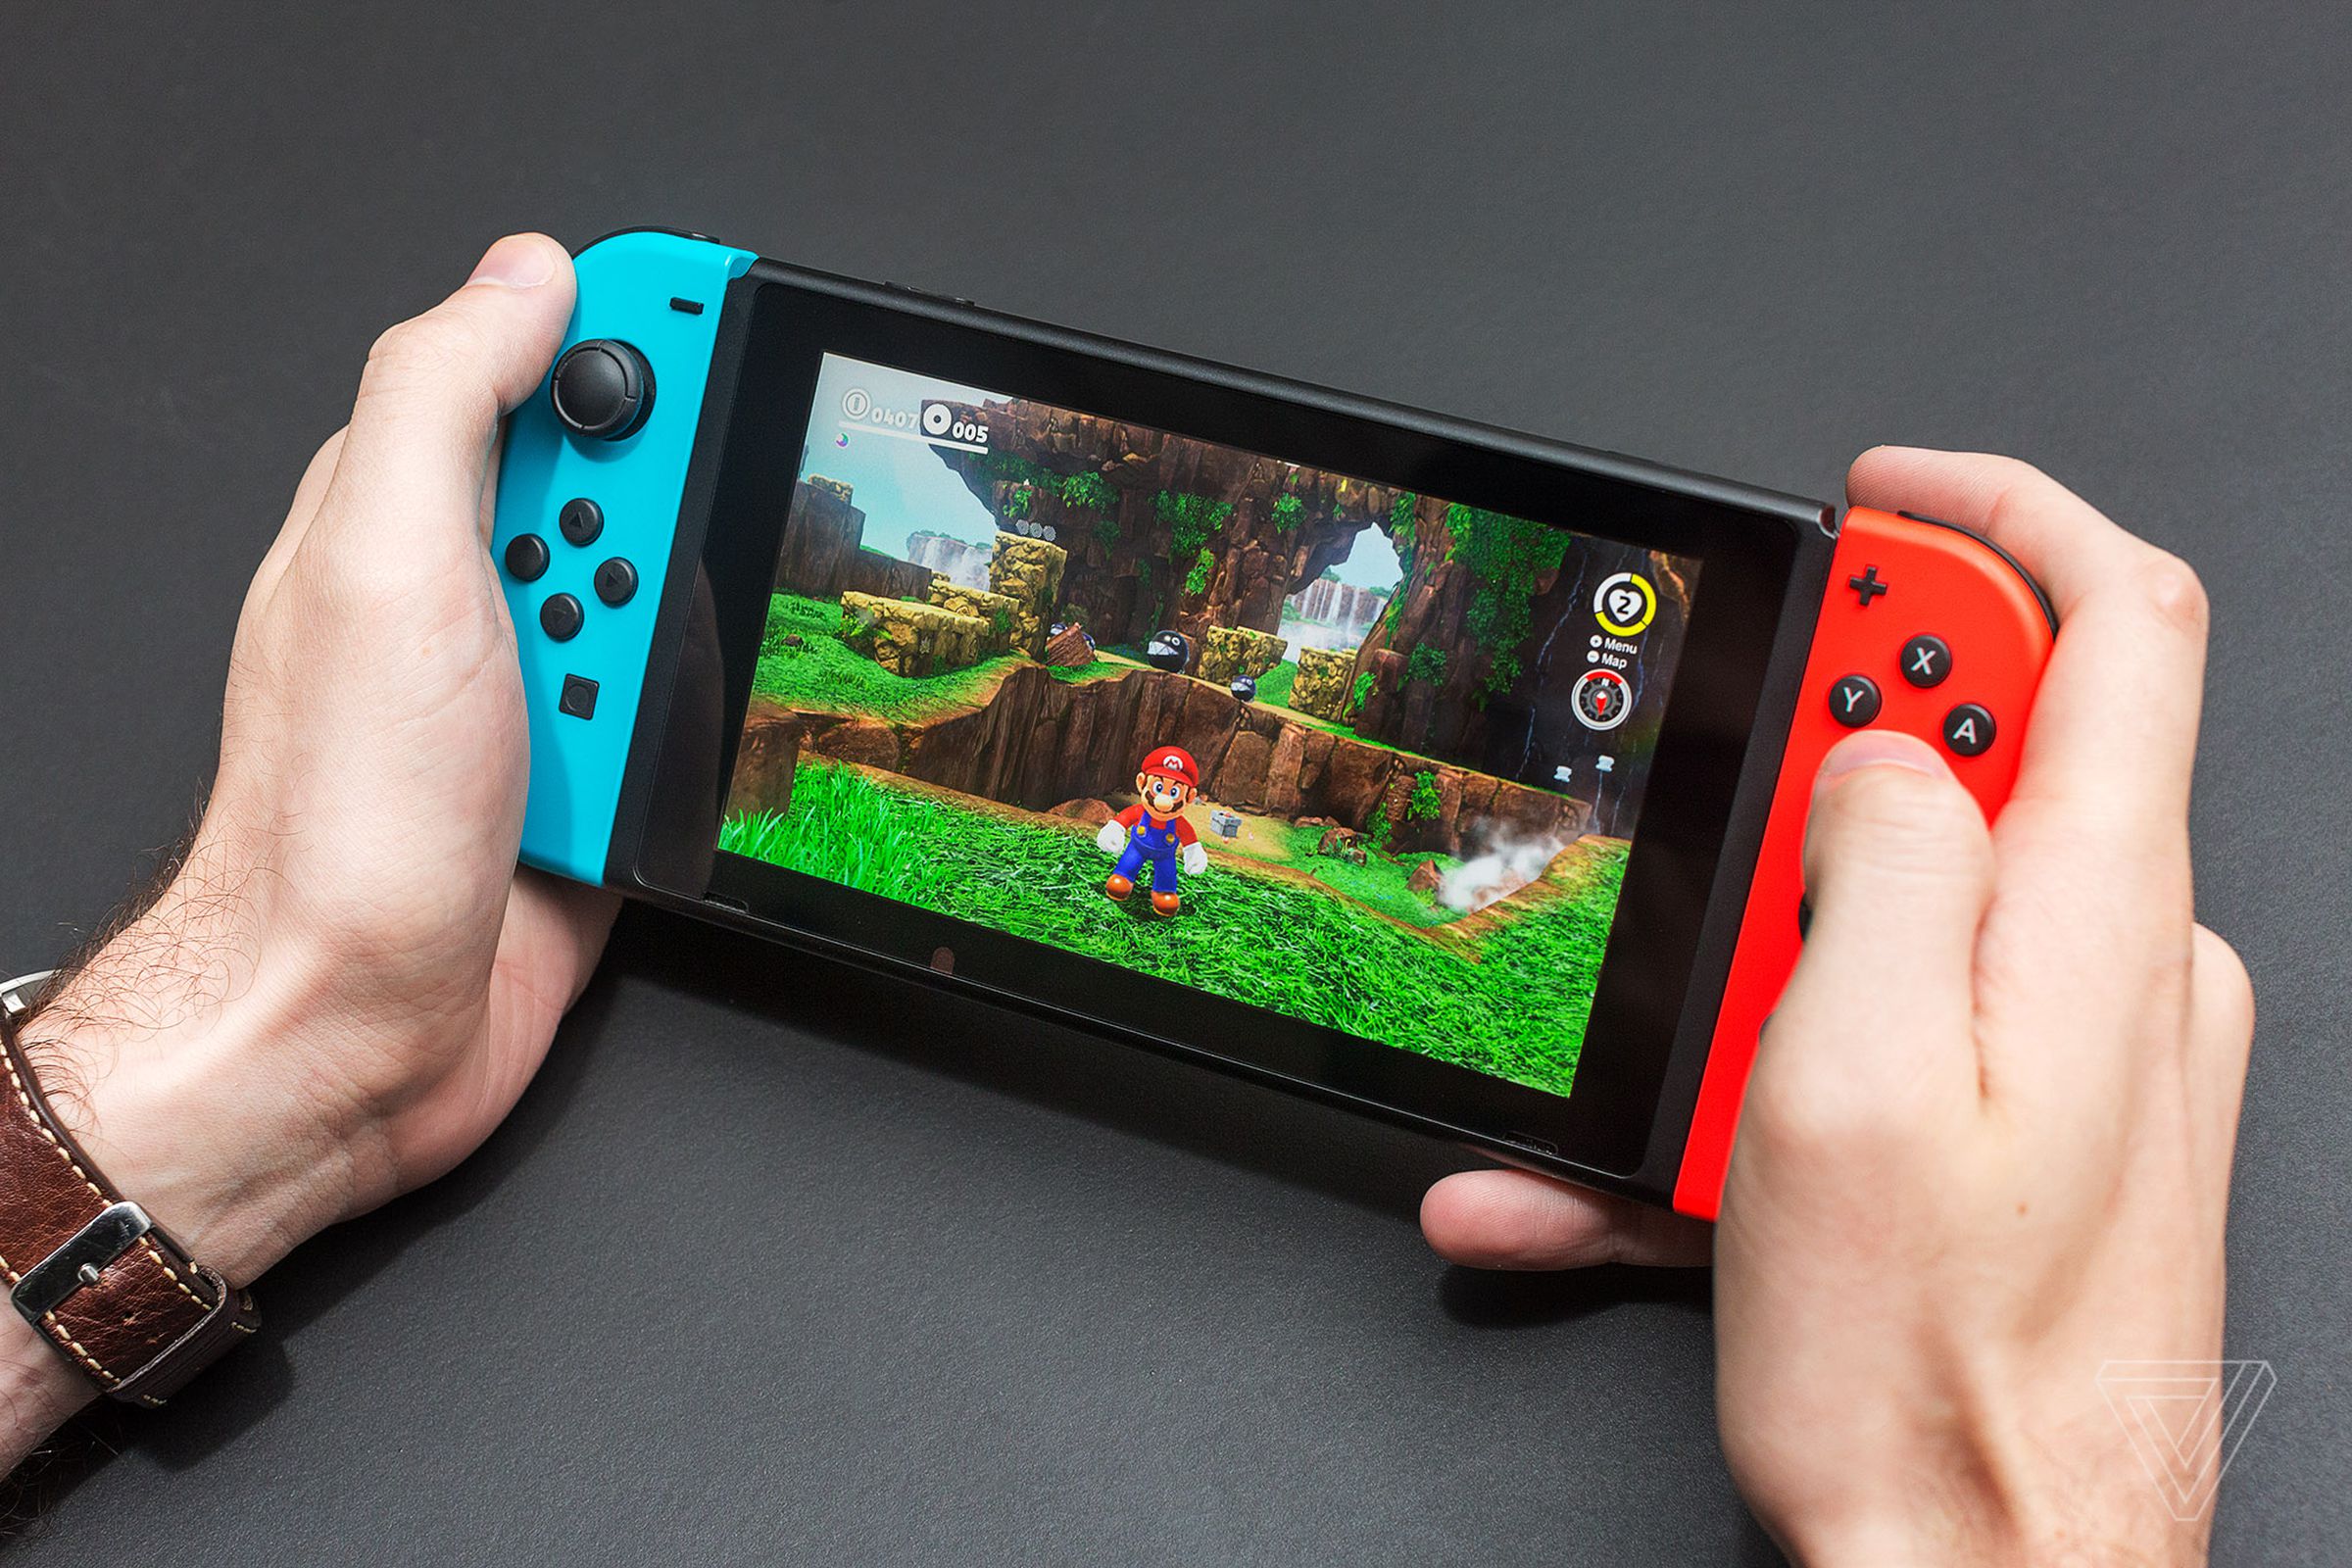 A pair of hands holding a Nintendo Switch console with neon red and blue Joy-Con controllers, playing Super Mario Odyssey in handheld mode.